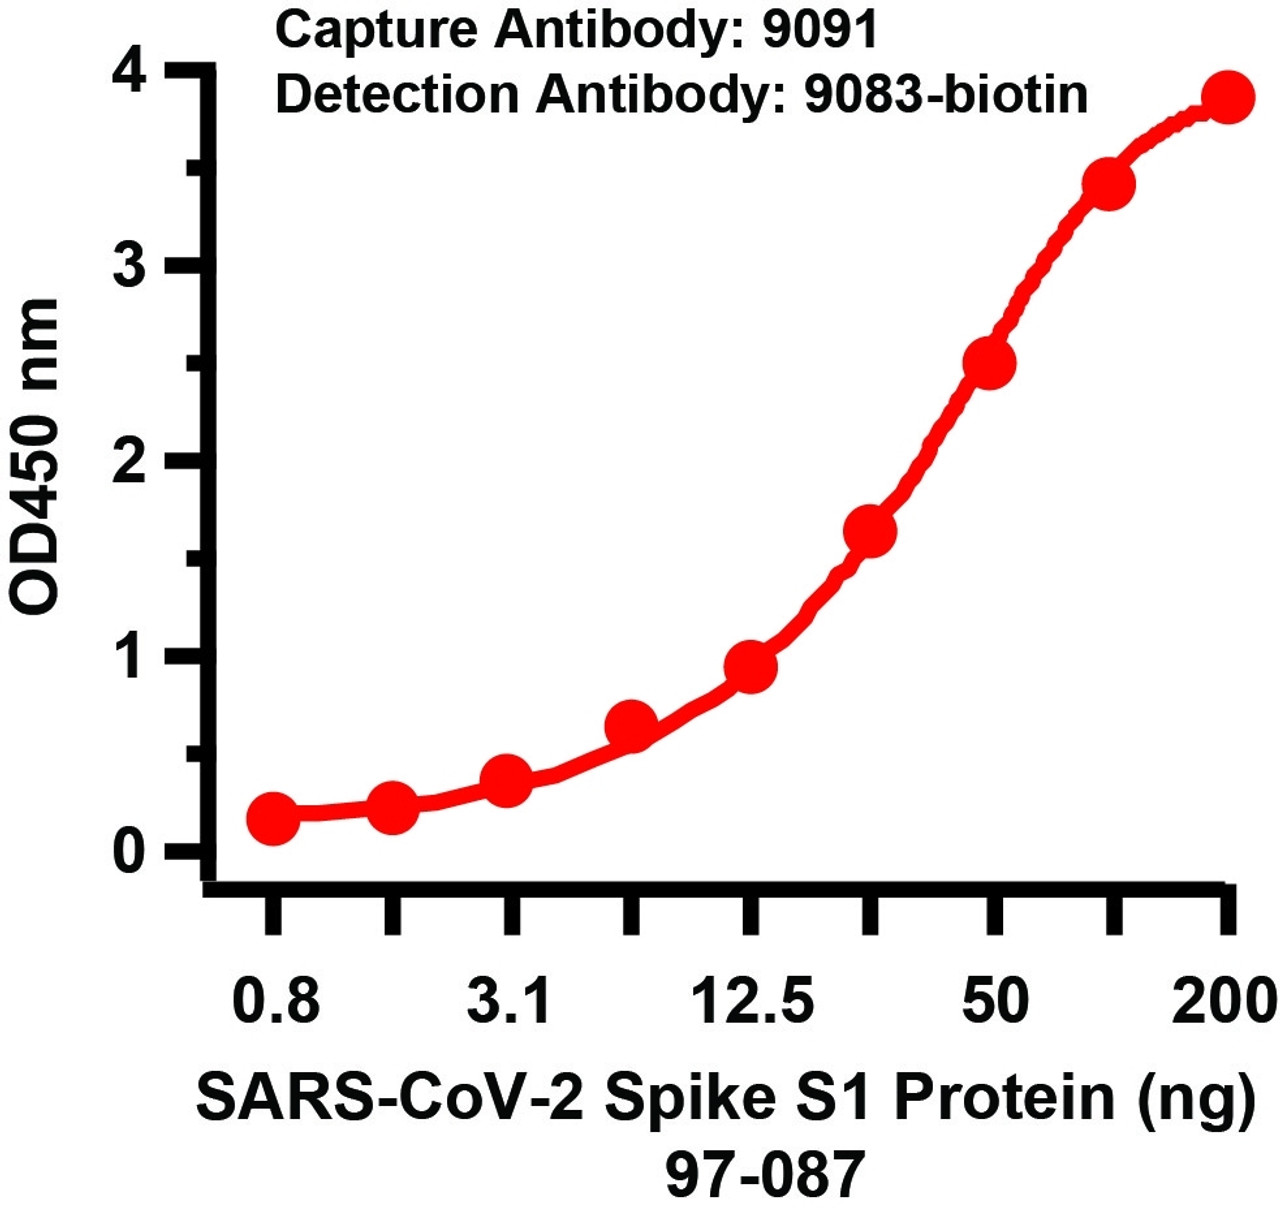 Figure 1 ELISA Validation of SARS-CoV-2 Spike Antibody Pair
A sandwich ELISA was performed using the anti-SARS-COV-2 Spike S1 antibodies 9091 (10 &#956;g/mL ) as the capture antibody. Biotin-labled anti-SARS-COV-2 Spike S1 antibodies 9083-biotin (1 &#956;g/mL ) and streptavidin-HRP (0.1 &#956;g/mL ) were used for detection. Detection range is from 0.8 ng to 200 ng (SARS-CoV-2 Spike S1 Protein, 97-087) .